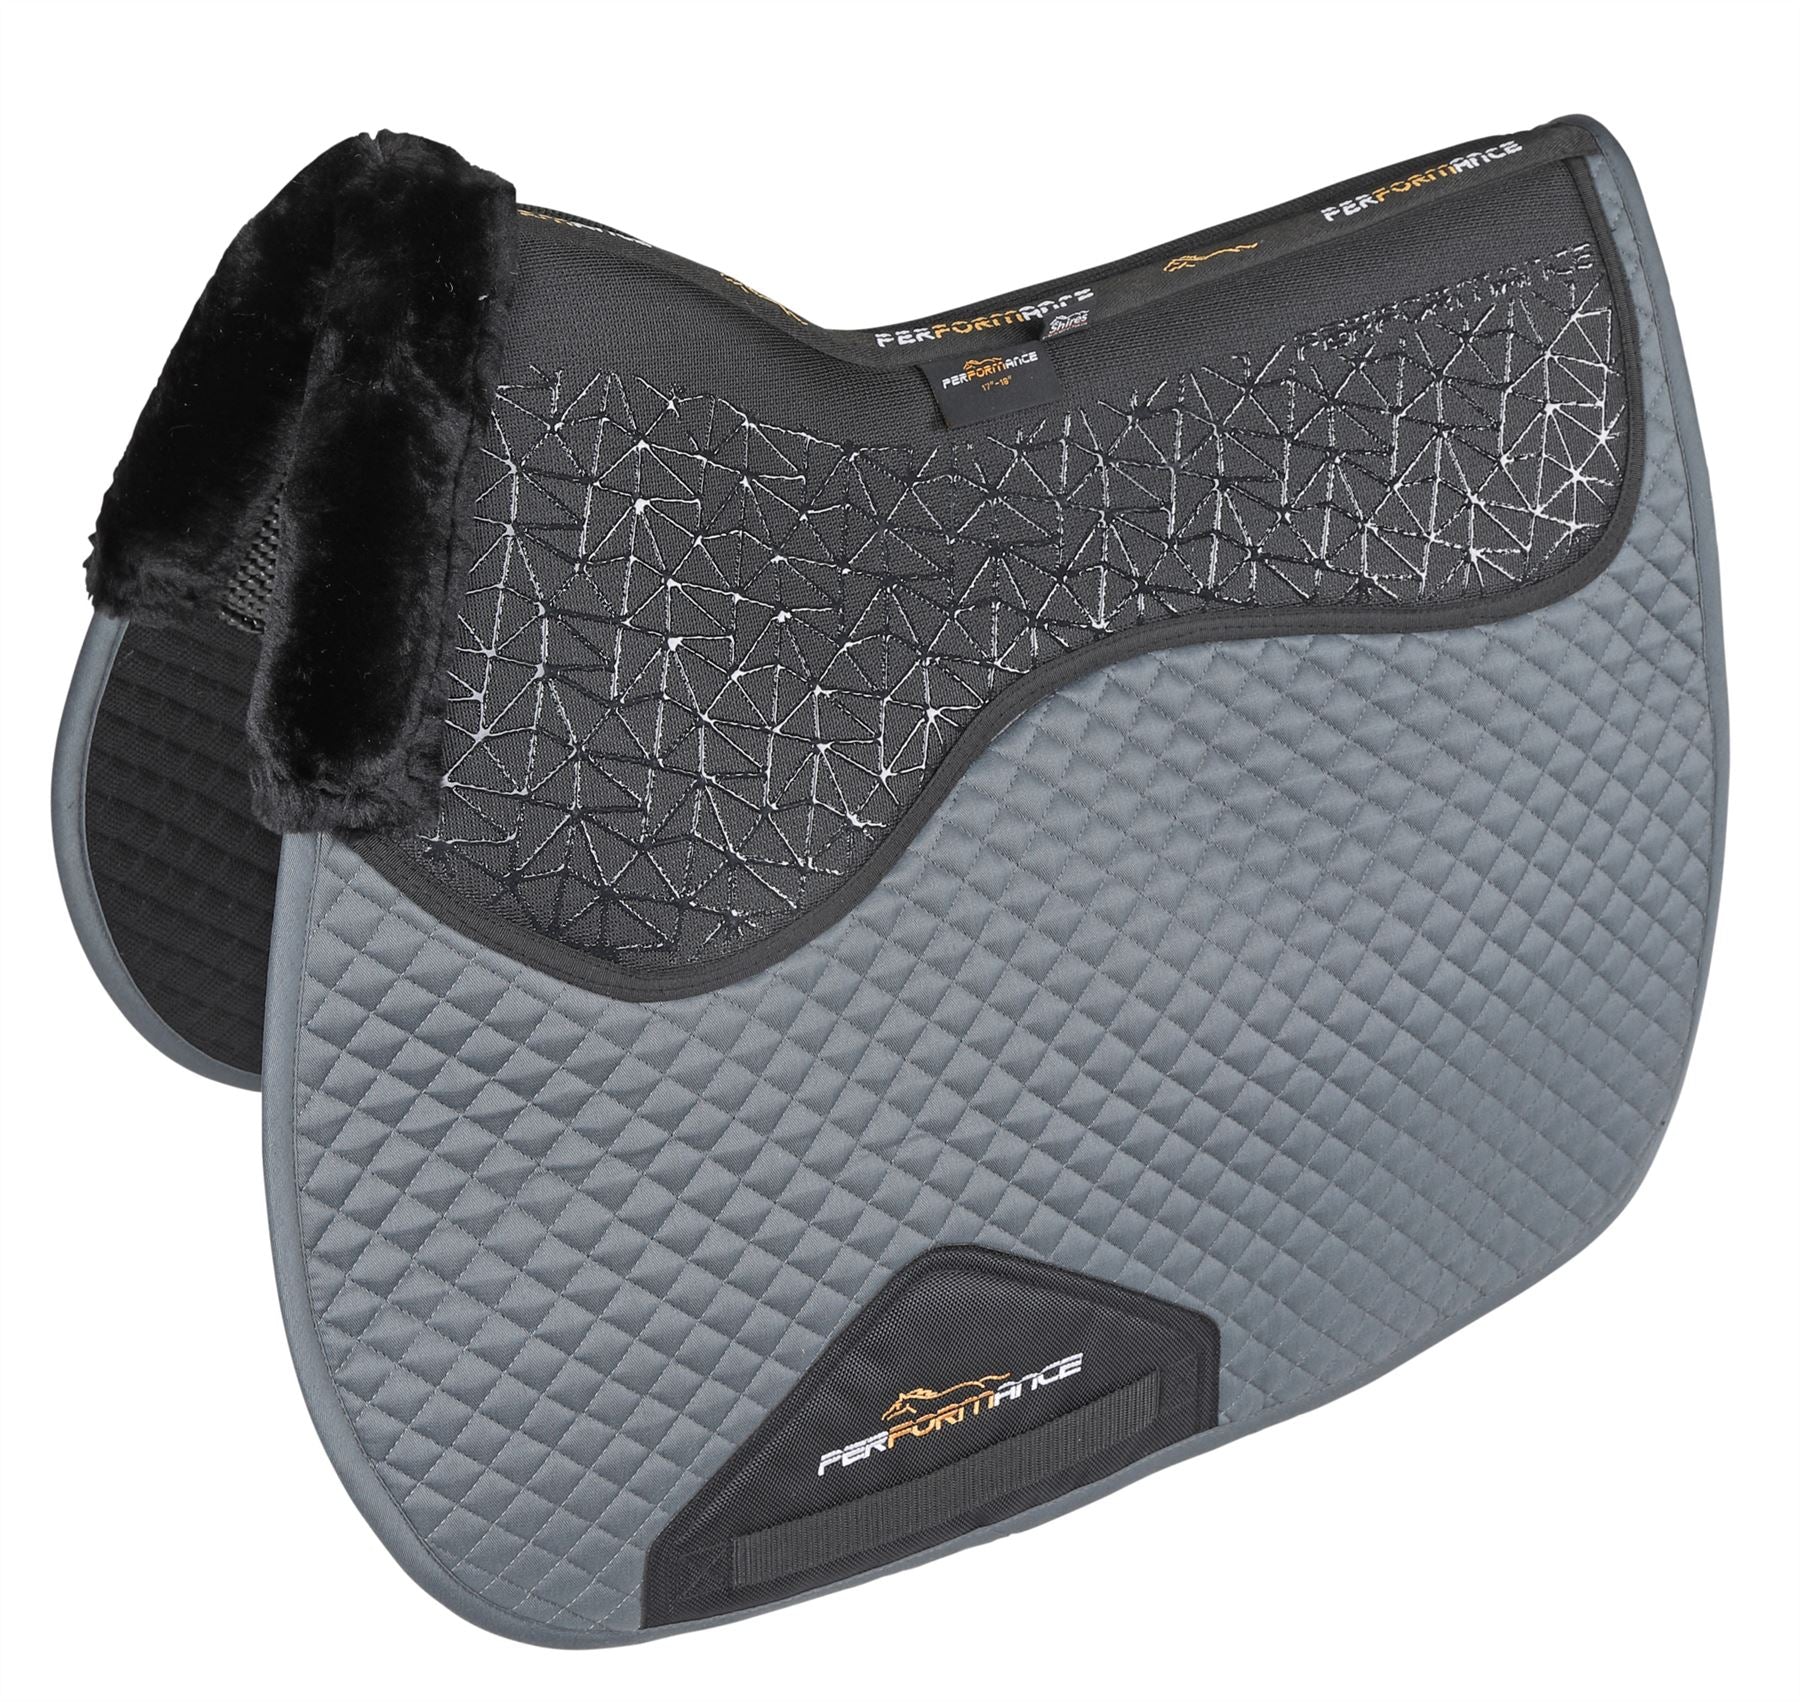 Shires Performance Fusion Saddlecloth - Just Horse Riders